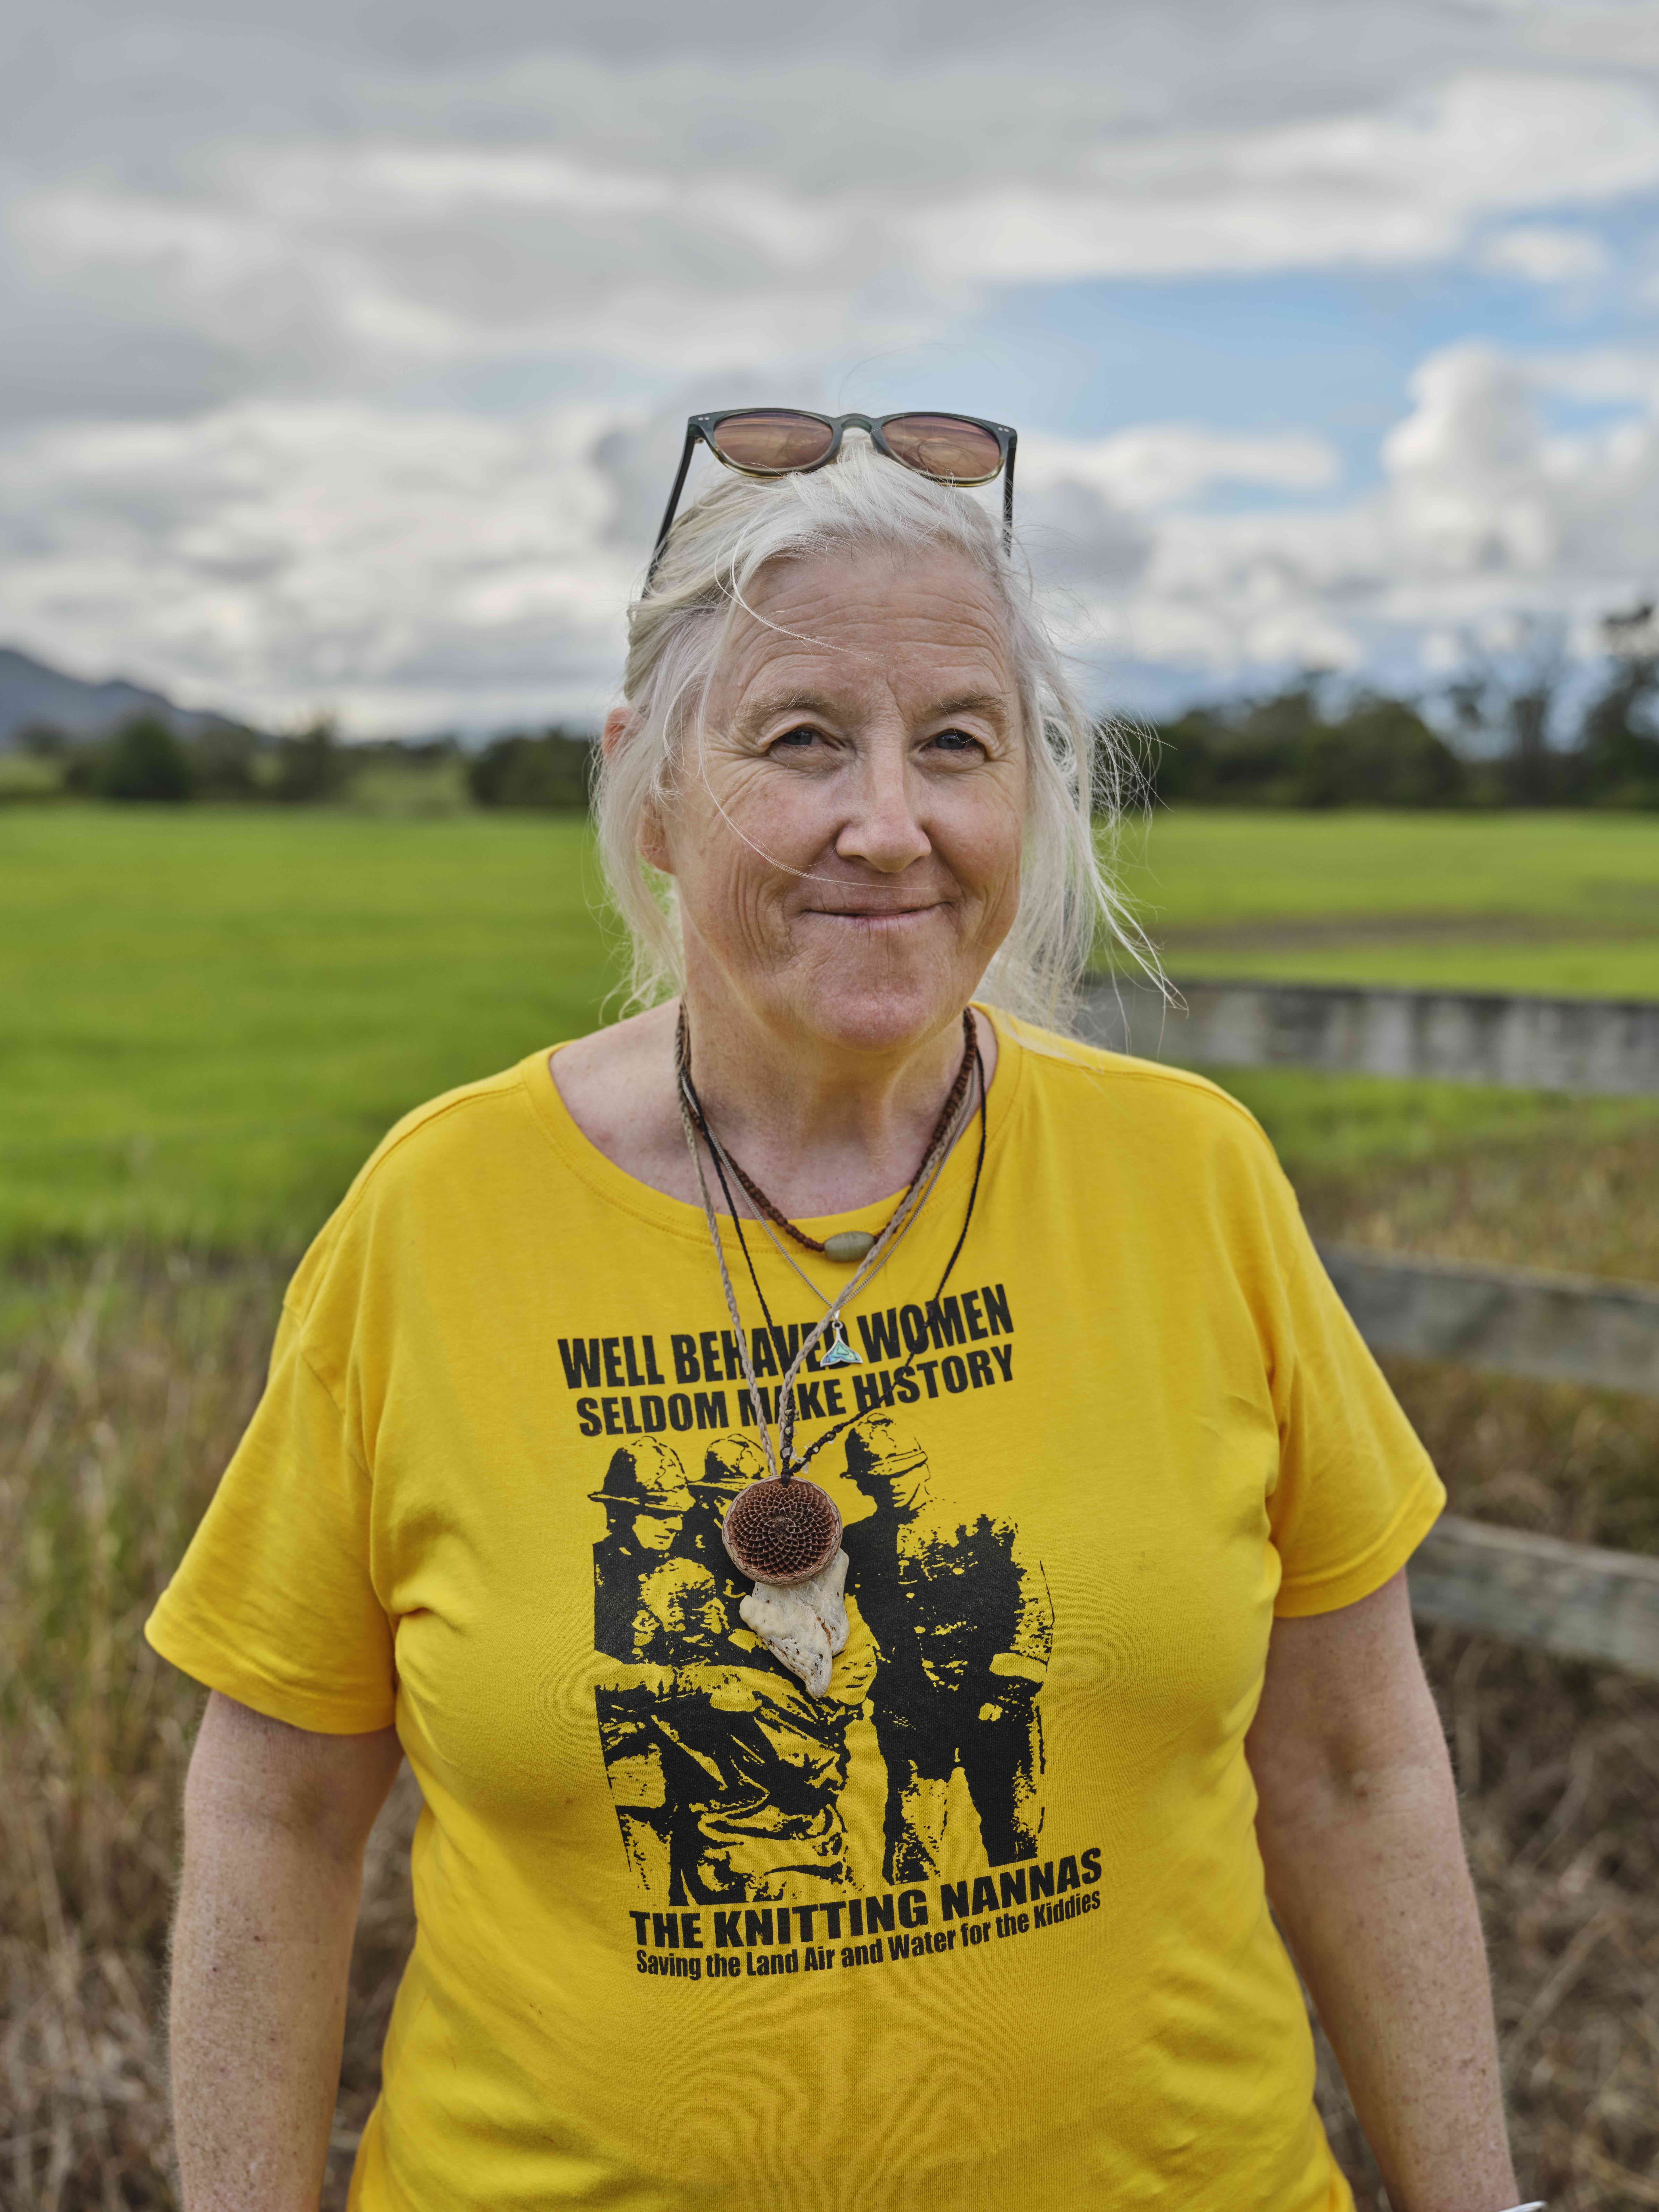 A portrait of Dominique Jacobs standing in a field, wearing a yellow t-shirt, a couple necklaces, and her sunglasses on her head.